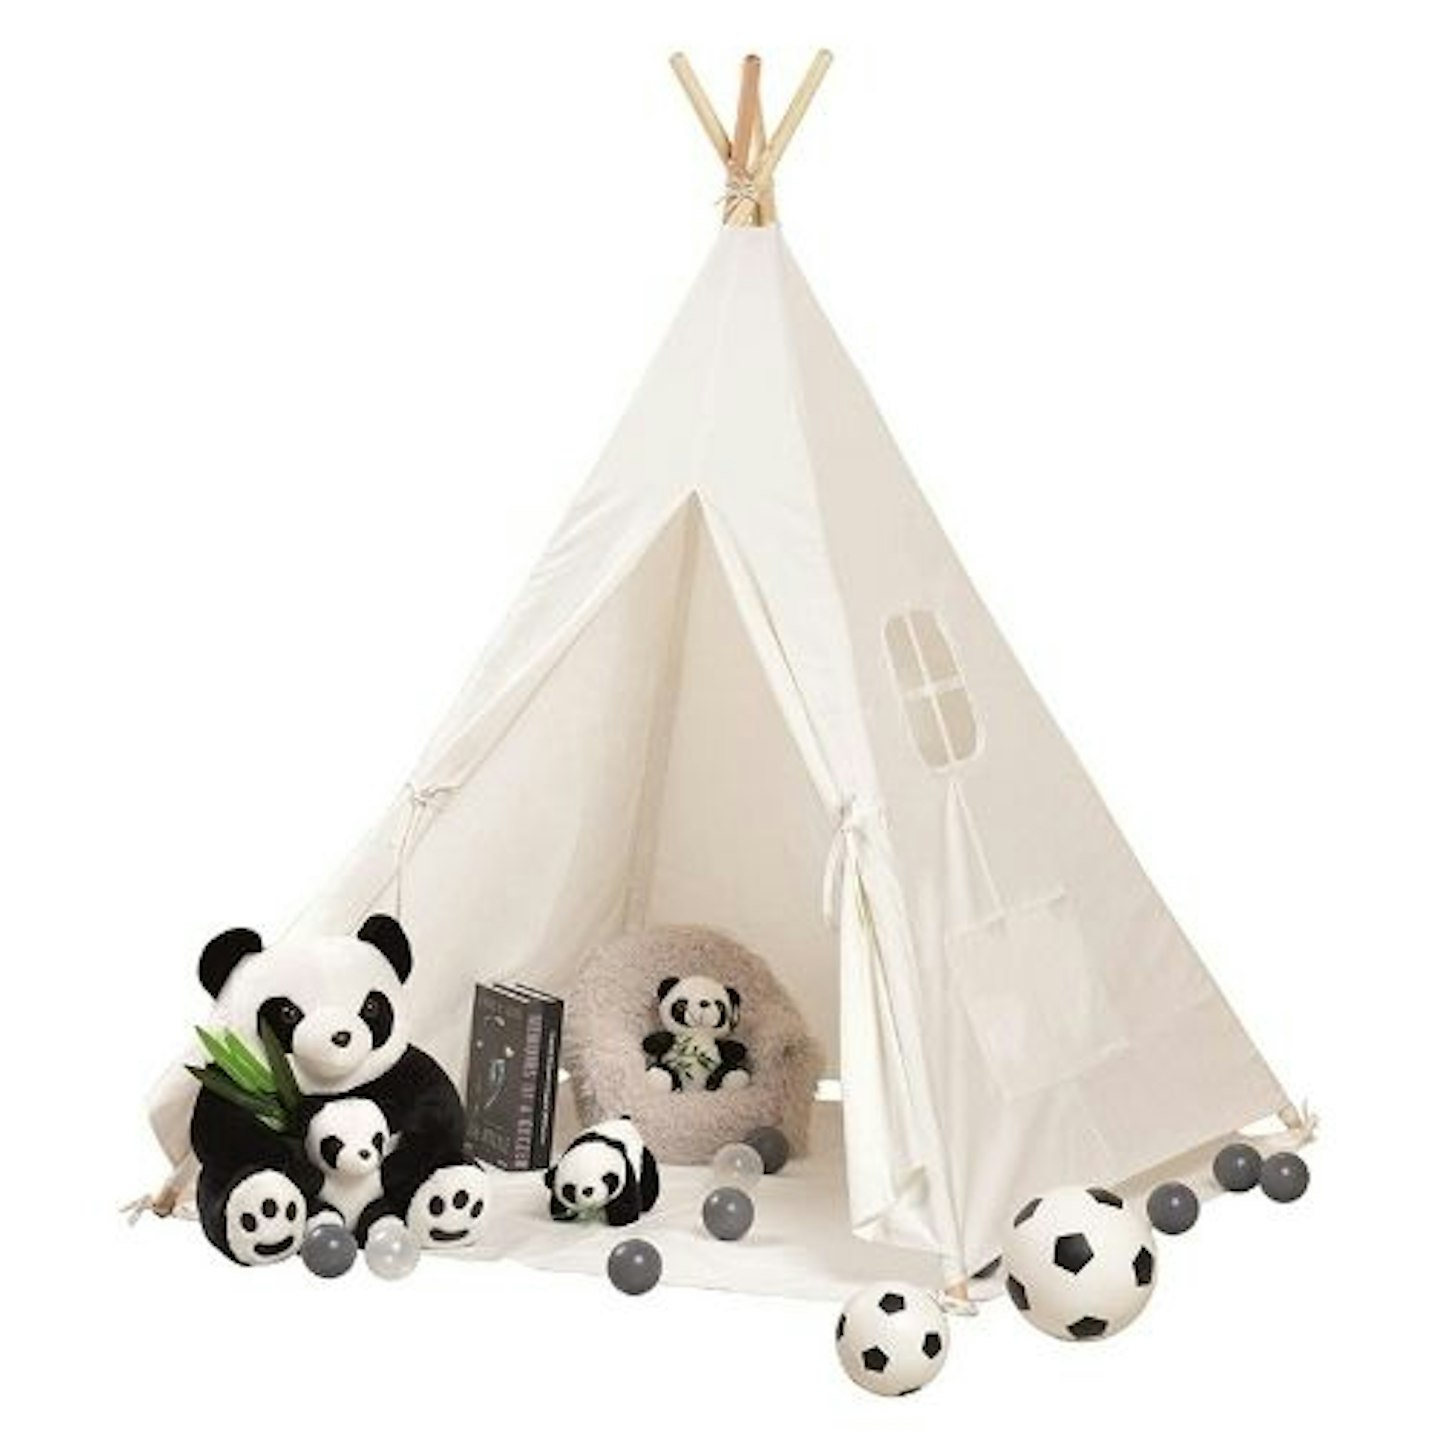 SweHouse Teepee Tent for Kids